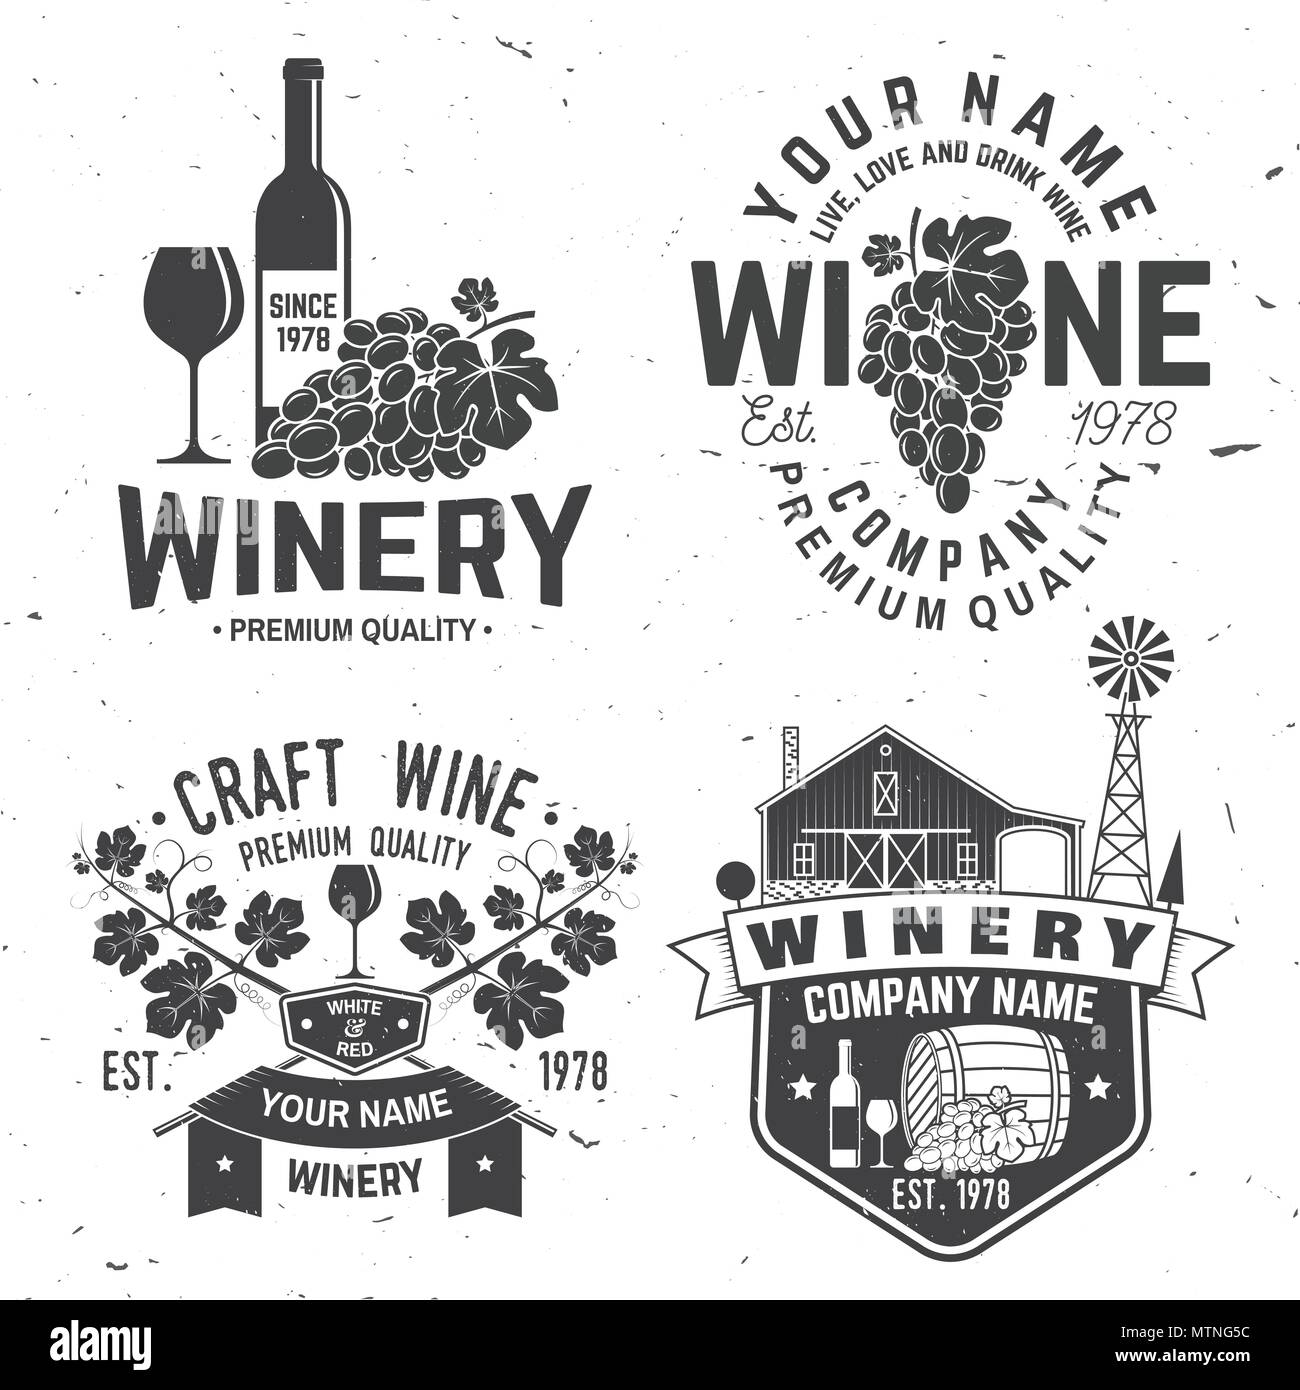 Winery company badge, sign or label. Vector illustration. Vintage design for winery company, bar, pub, shop, branding and restaurant business. Coaster for wine glasses Stock Vector